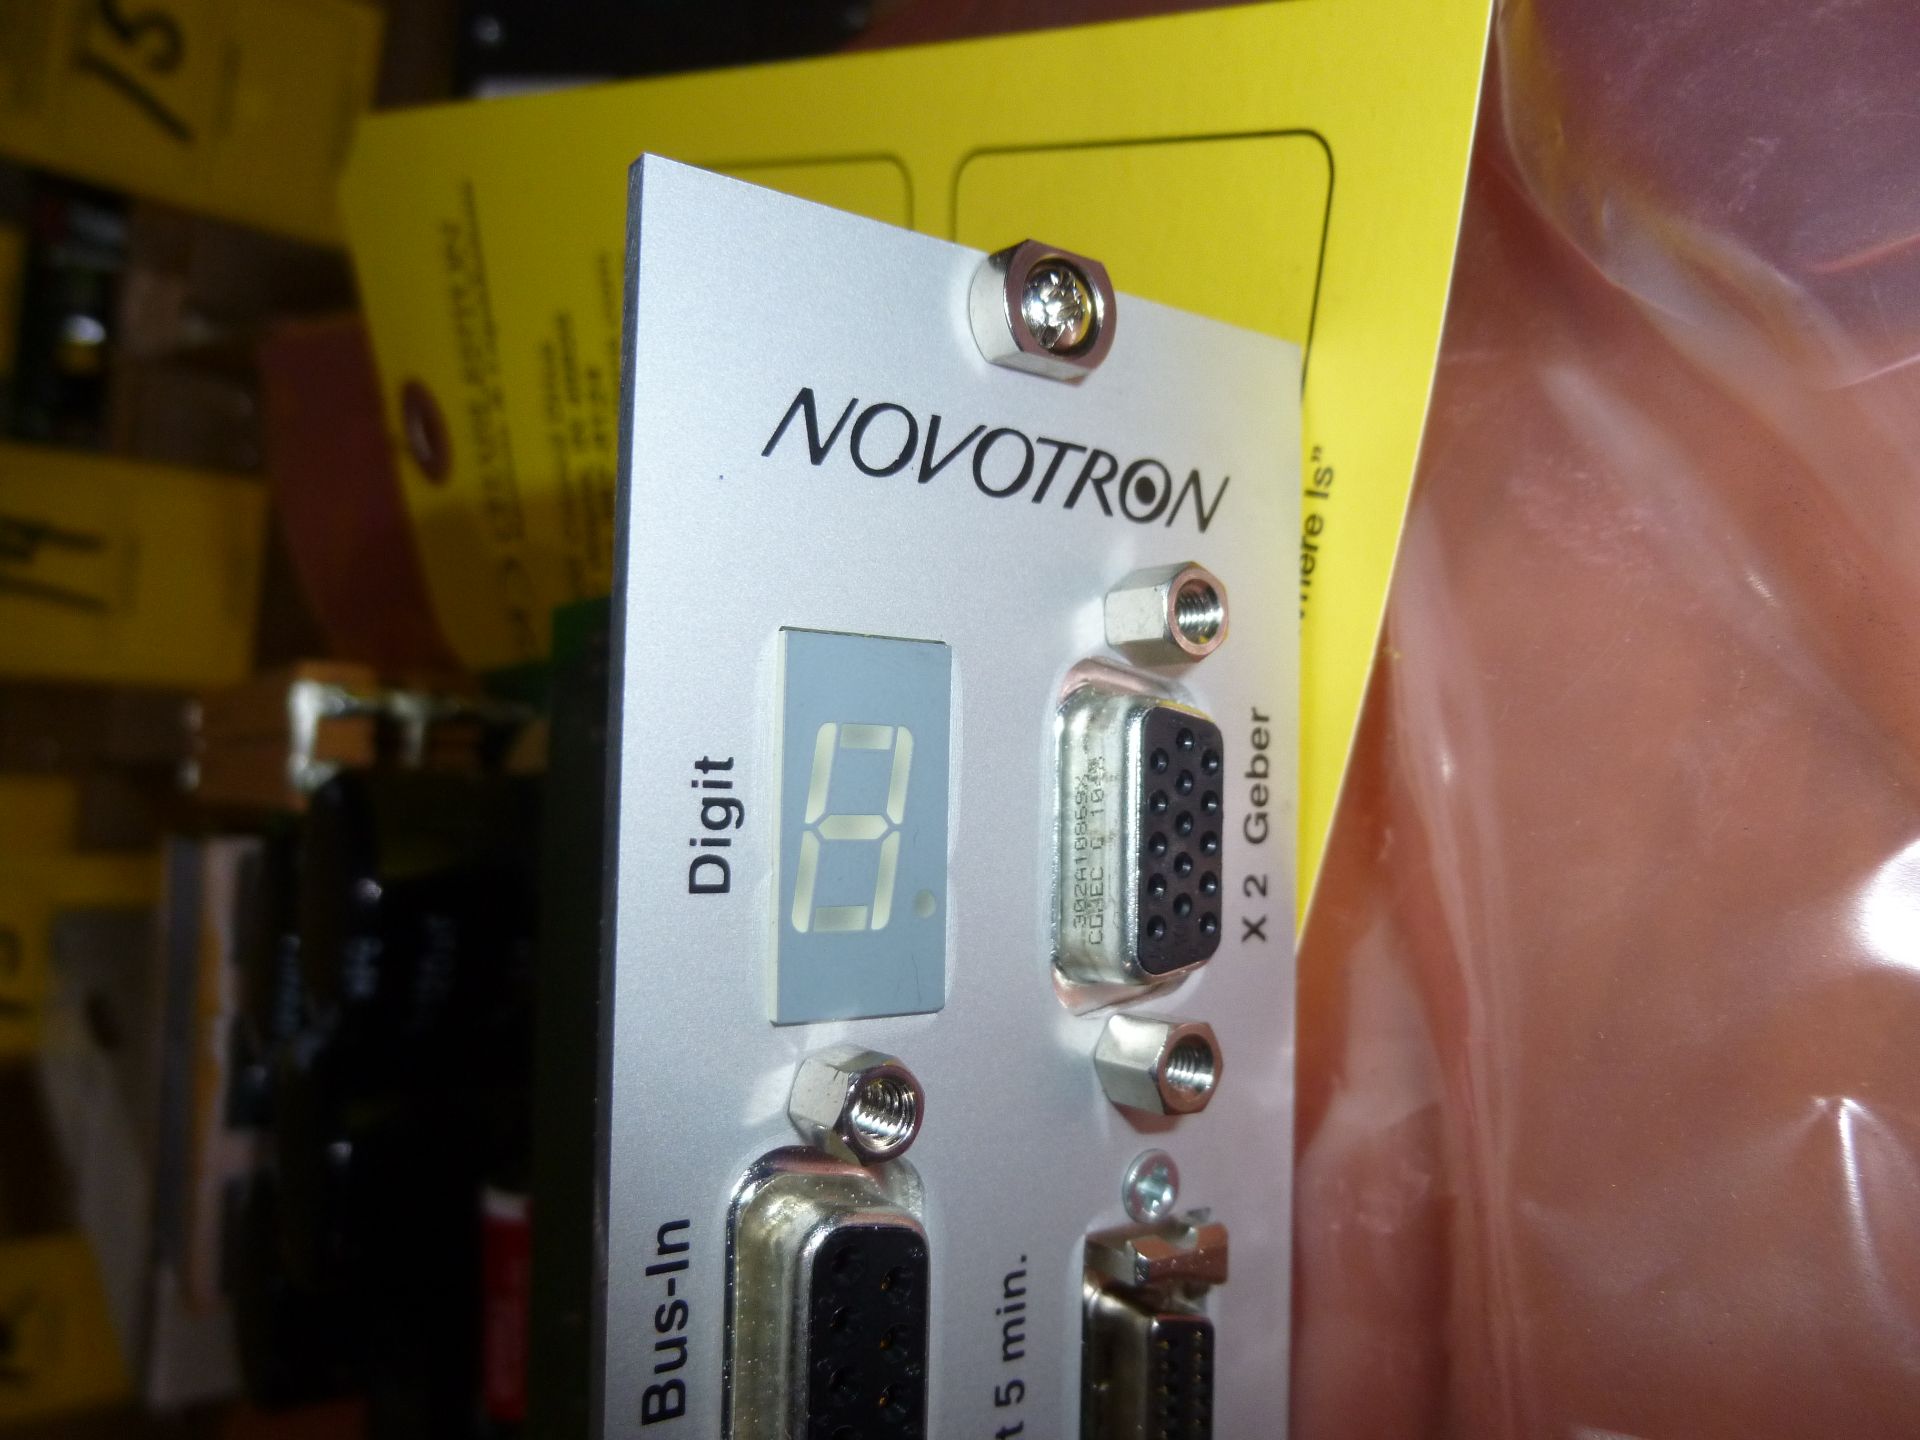 Novotron model ND31-3204, new in package, as always with Brolyn LLC auctions, all lots can be picked - Image 3 of 3